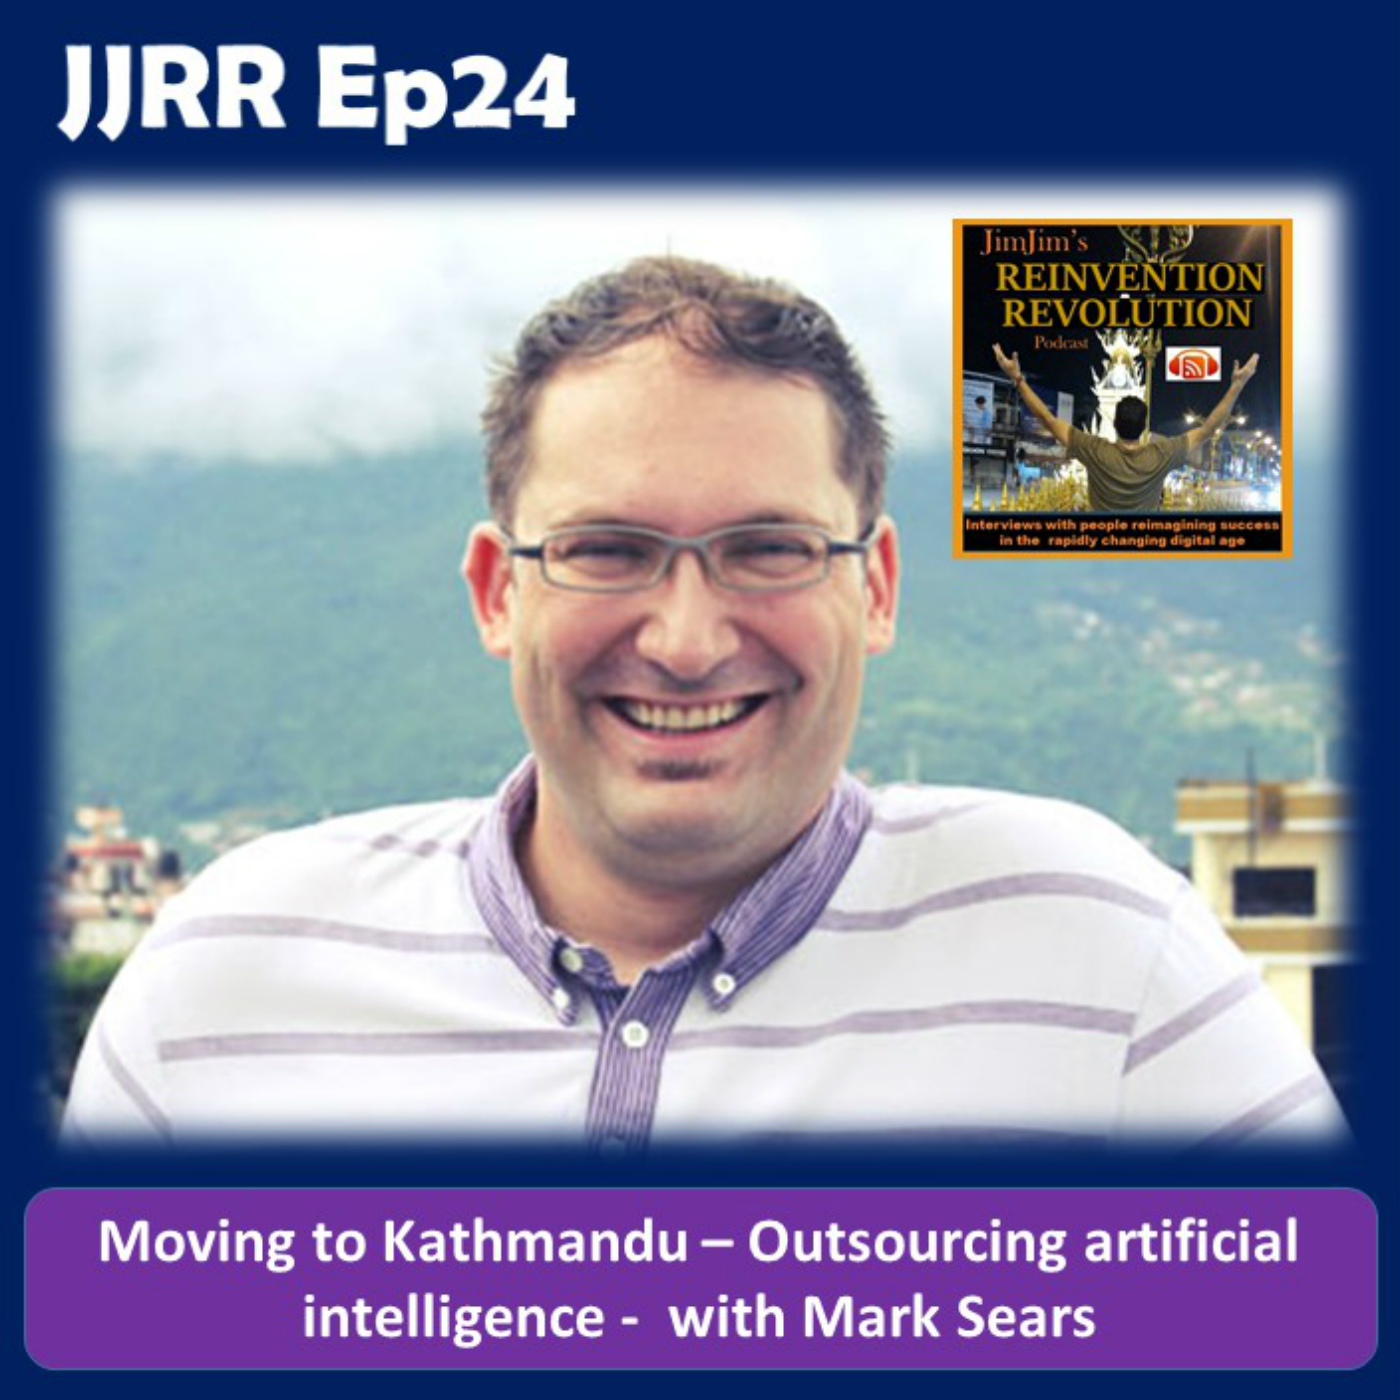 Read more about the article JJRR Ep24 Moving to Kathmandu – Outsourcing artificial intelligence – with Mark Sears